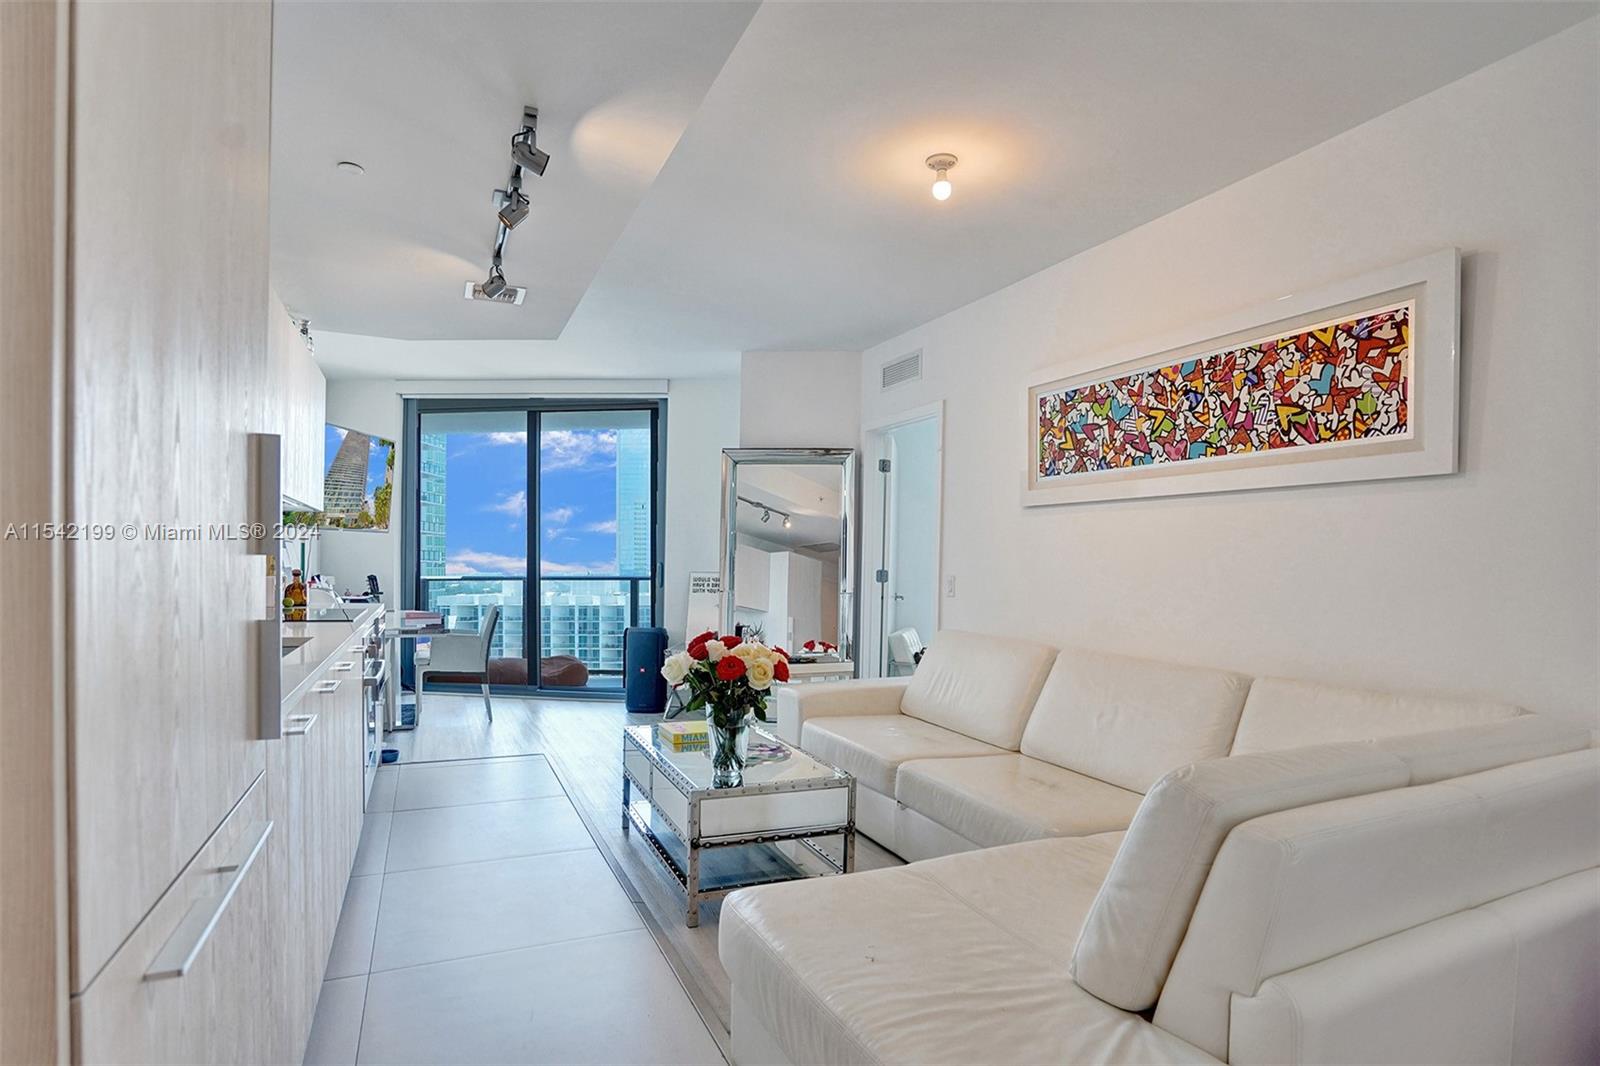 Modern building in hip, trendy Edgewater. 1 Bedroom + Den and 1 1/2 baths with spectacular city and bay views from the 23rd floor. 9-foot-high ceilings with floor to ceiling hurricane proof windows. Kitchen with Bosch appliances, quartz countertops, washer and dryer inside the unit, window treatments, closet cabinetry, and ceramic floors throughout including the oversized balcony. 
Paraiso Bayviews offers 5-star resort amenities such as movie theater, gym, spa, business center, rooftop pool with grill area, sunset pool, lighted tennis courts, boardwalk, and an incredible beach club with Amara restaurant from acclaimed chef Michael Schwartz. Walking distance to Midtown and Design District.